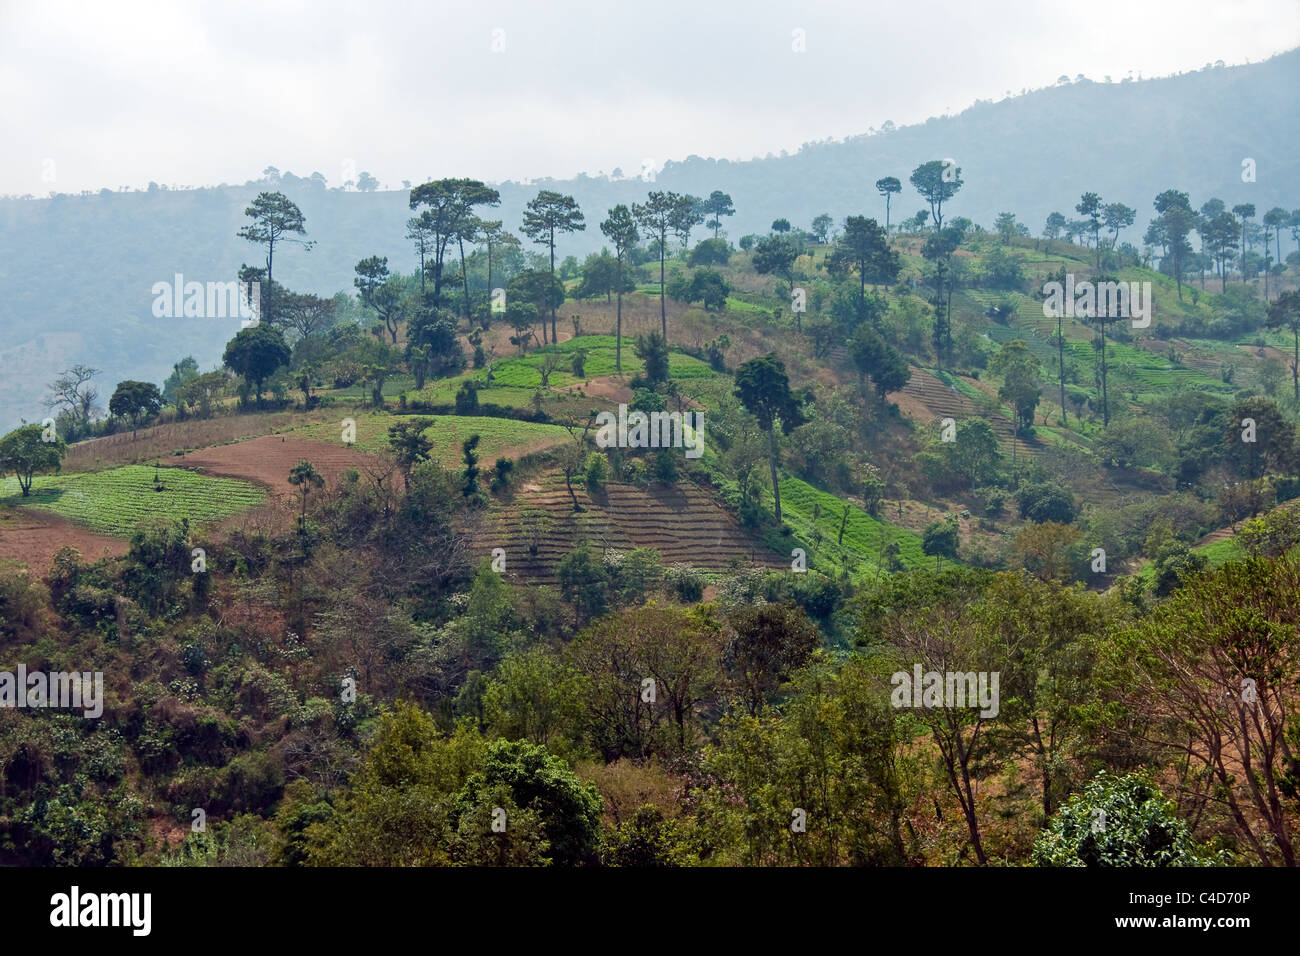 Hilly rural land being farmed west of Antigua, Guatemala. Stock Photo